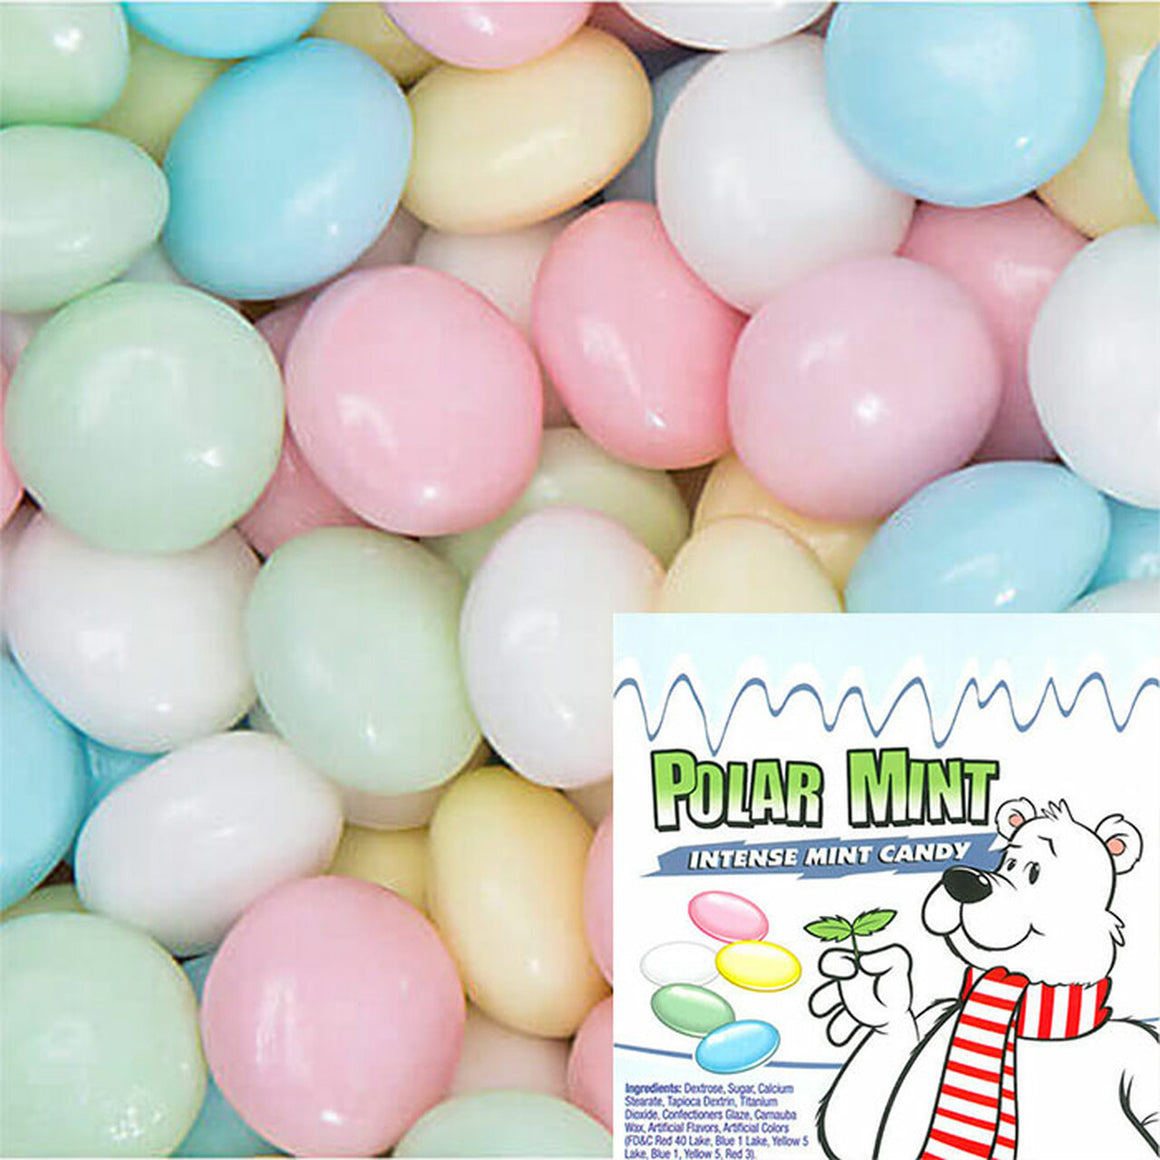 All City Candy Polar Mint Intense Mint Candy - 3 LB Bulk Bag Bulk Unwrapped Concord Confections (Tootsie) For fresh candy and great service, visit www.allcitycandy.com